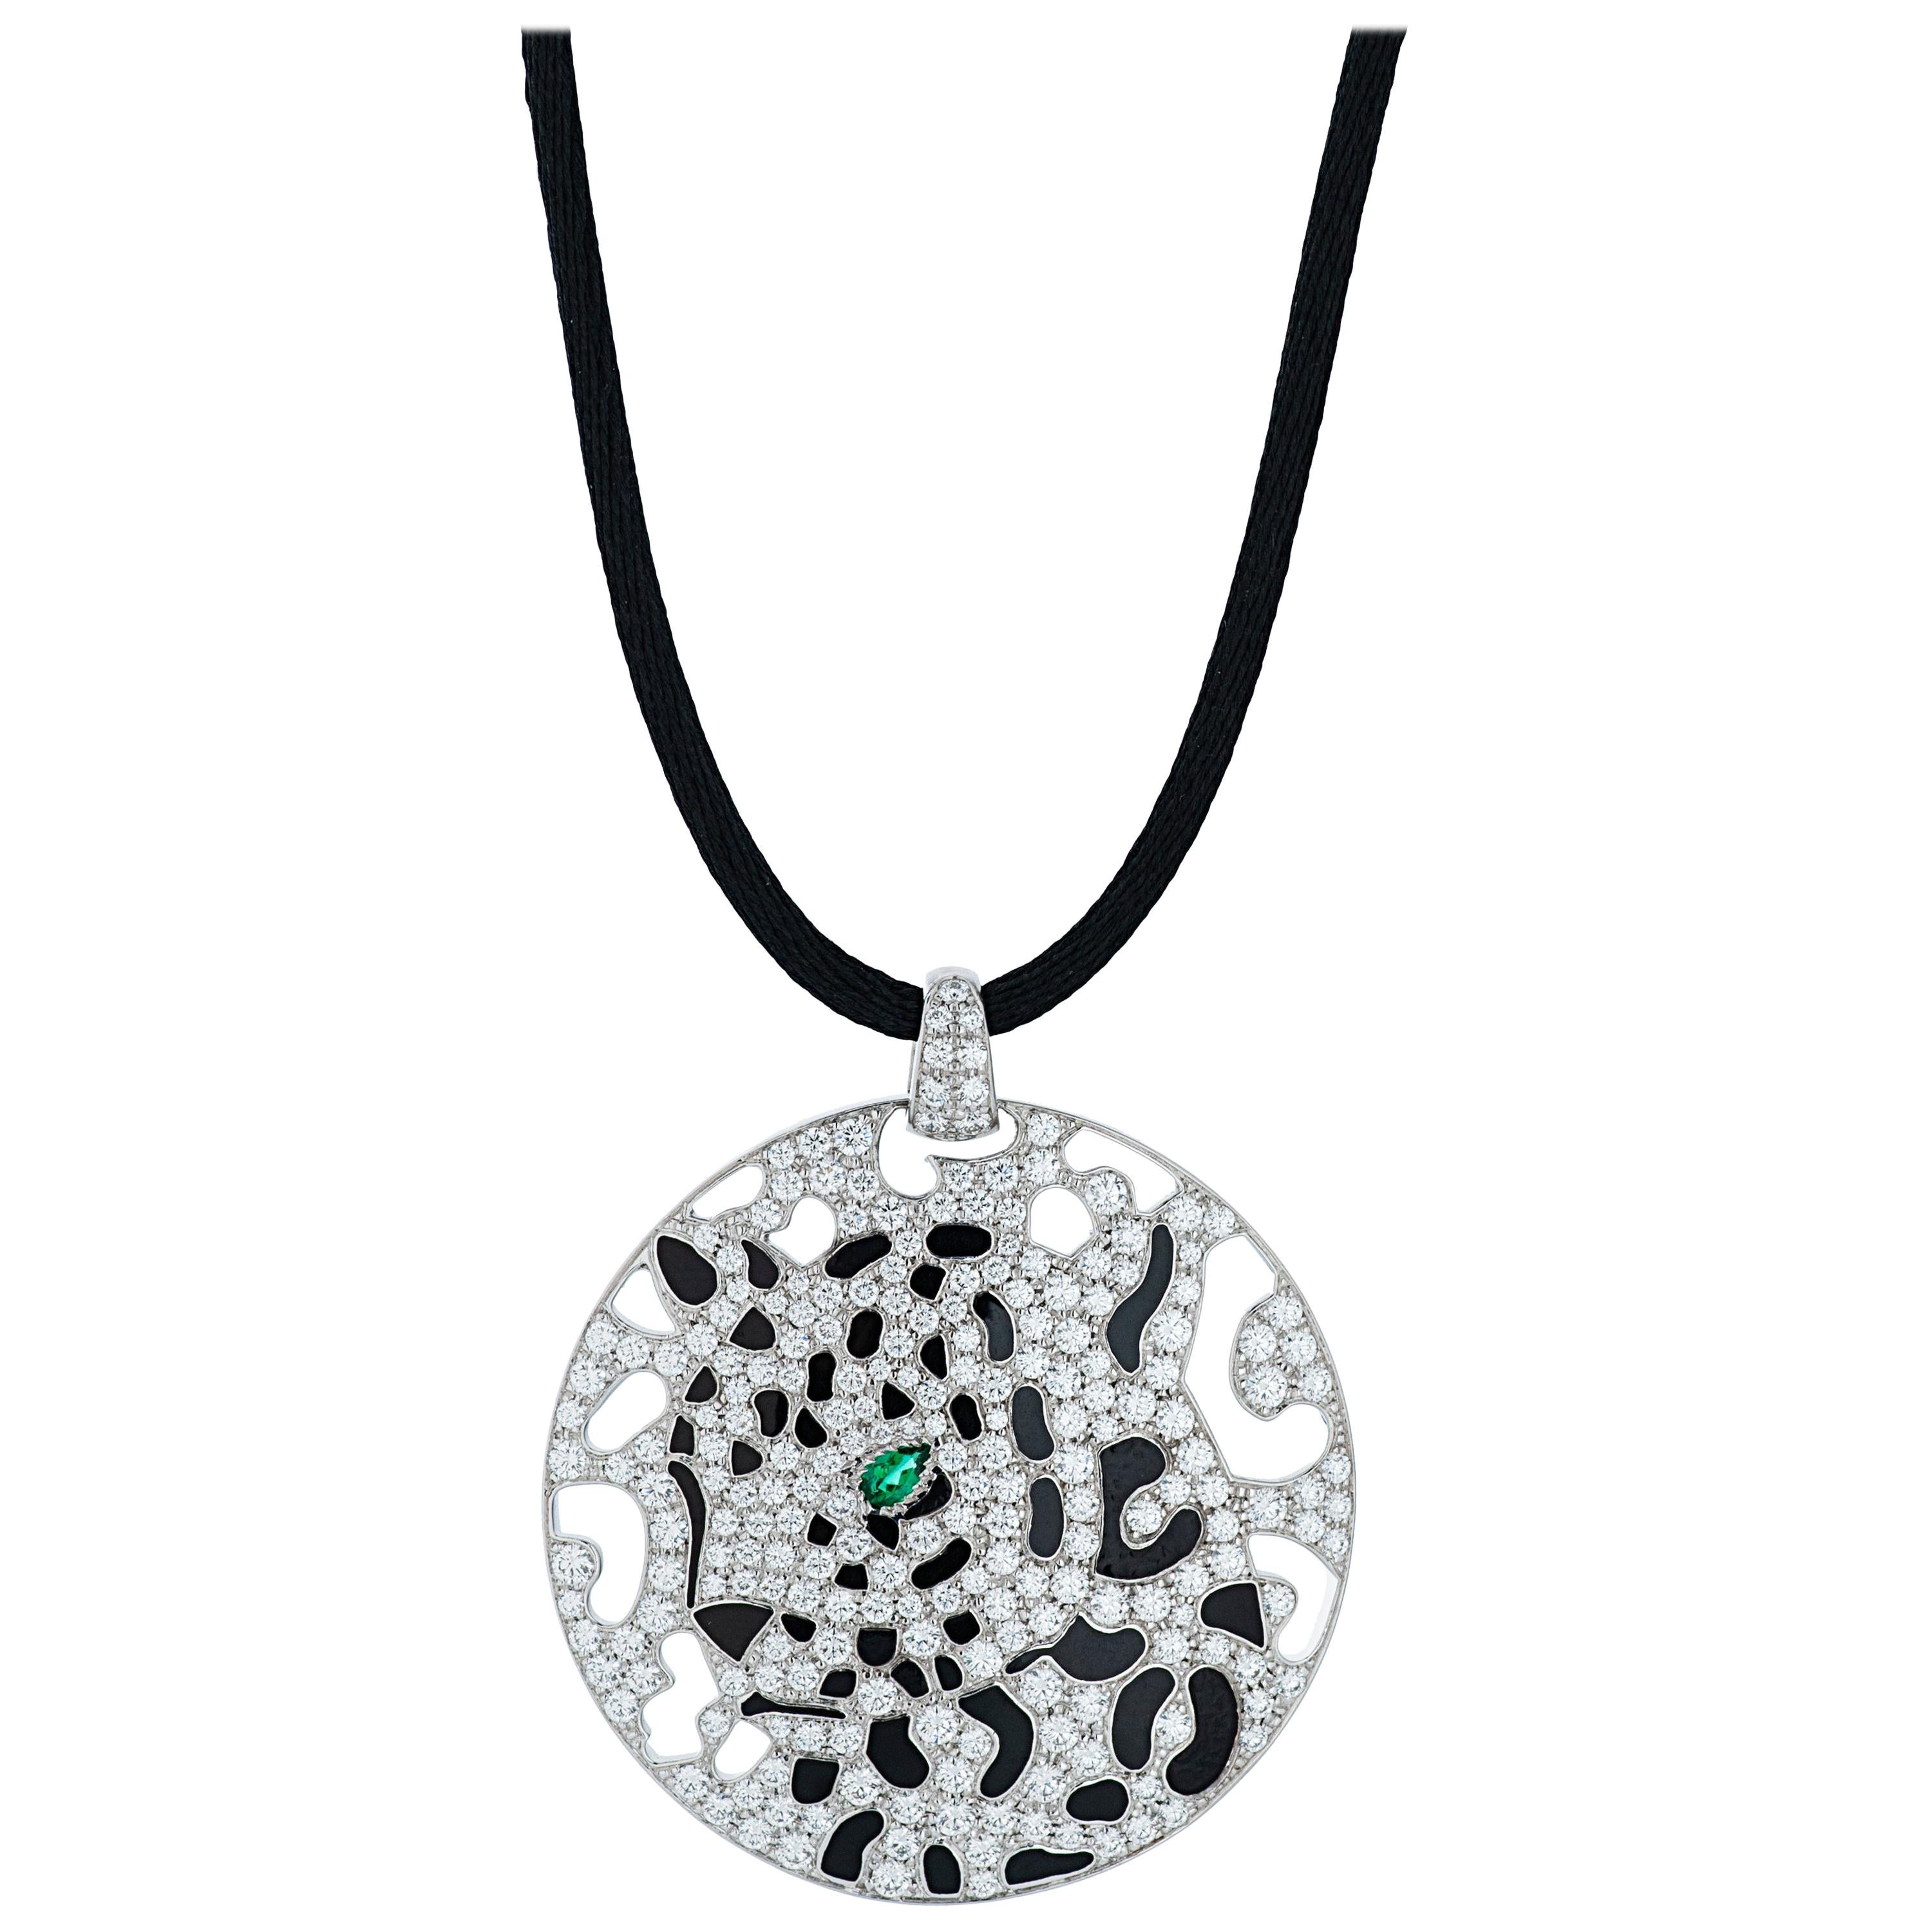 Cartier Diamond and Enamel Panther Openwork Disc Pendant on Black Cord Necklace